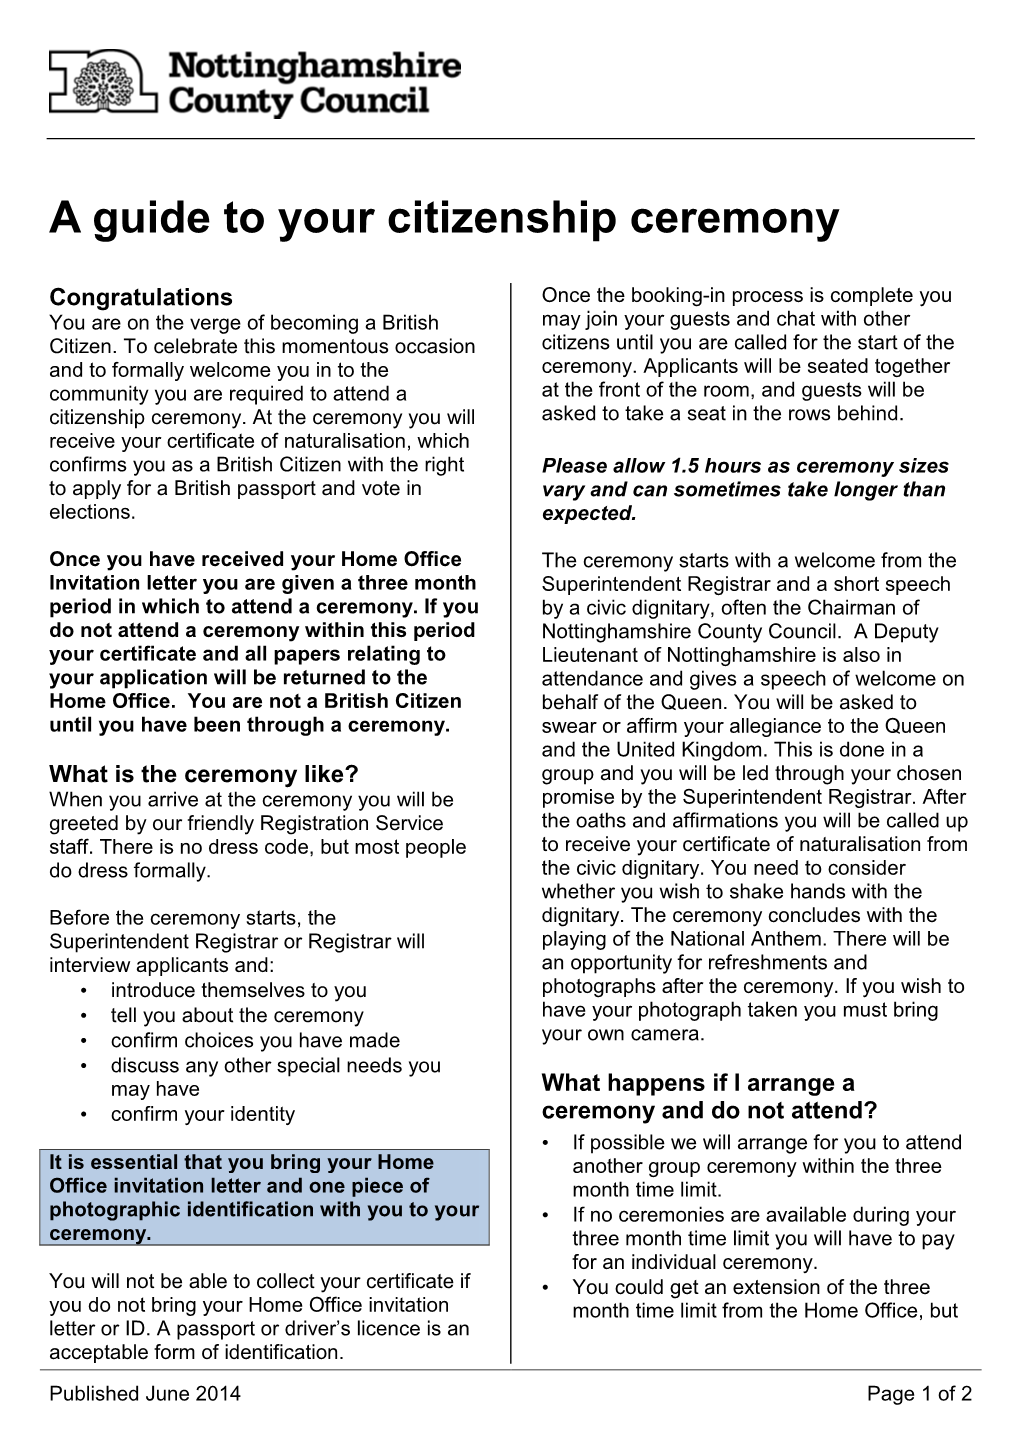 Guide to Your Citizenship Ceremony